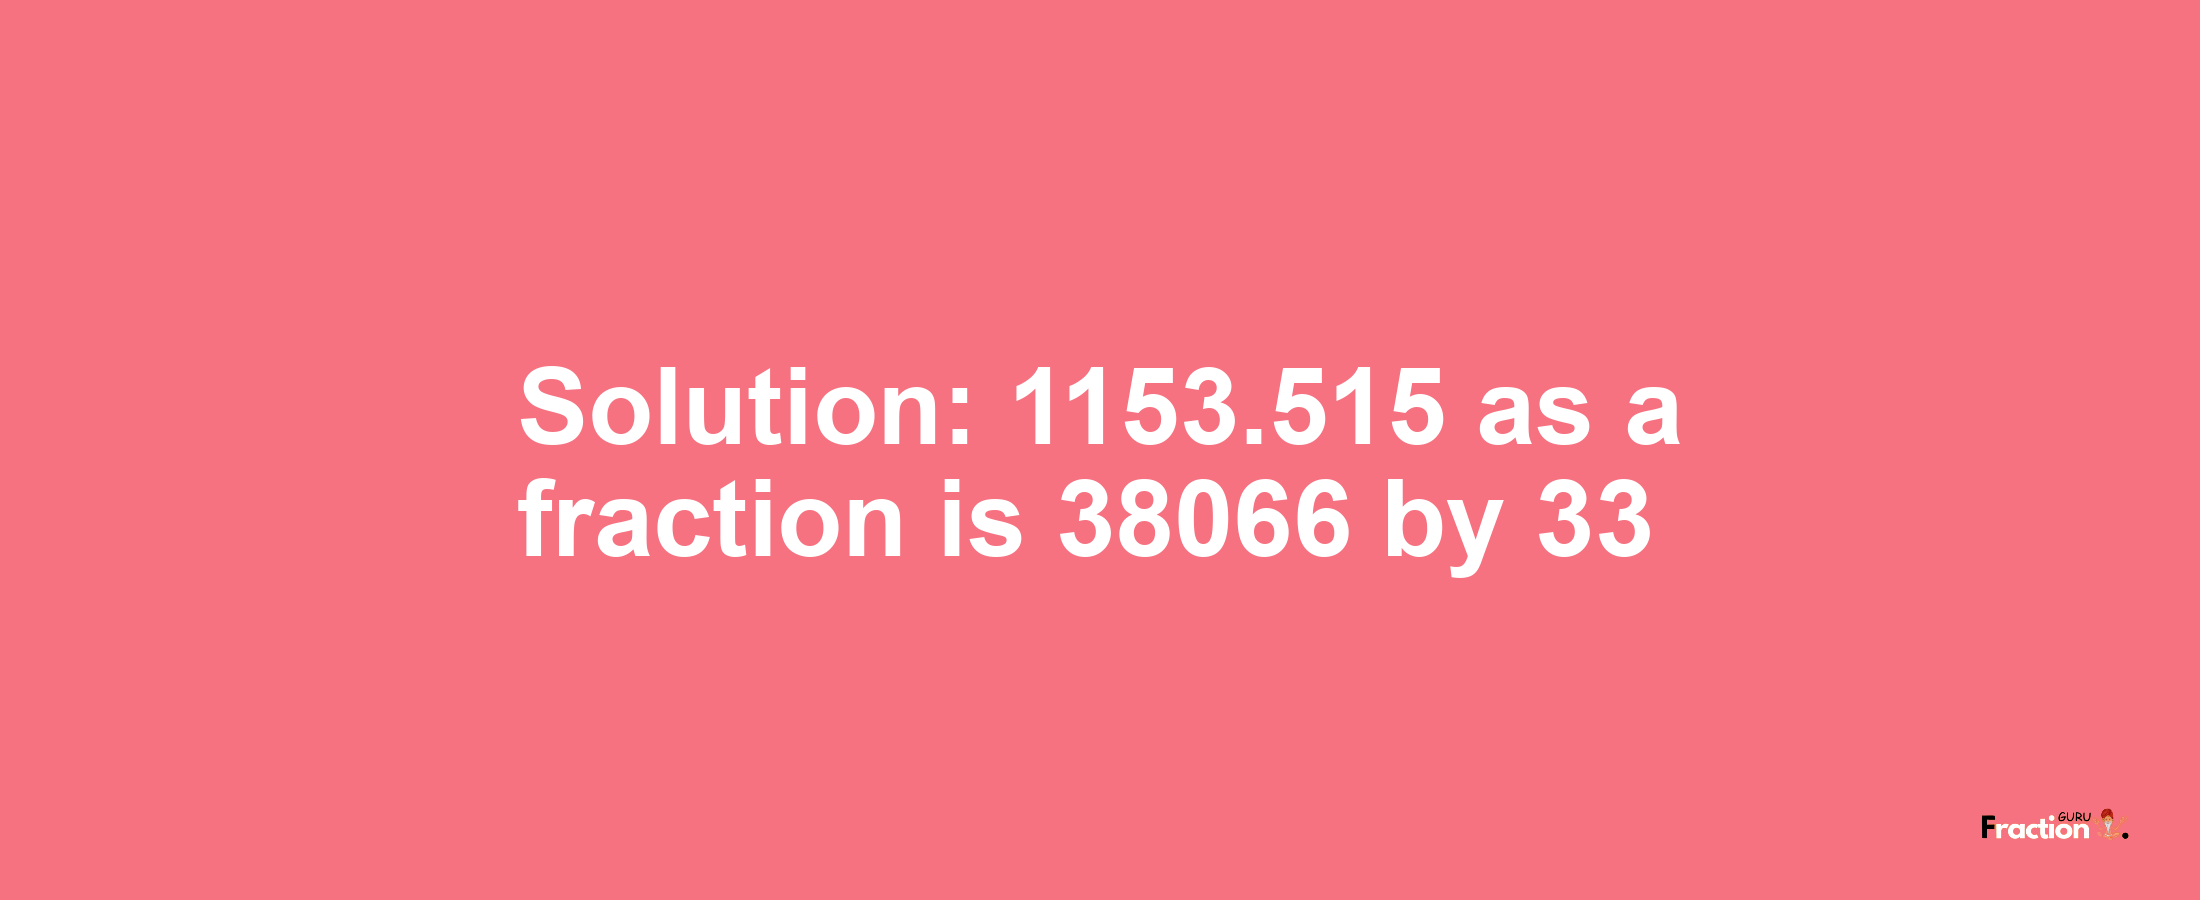 Solution:1153.515 as a fraction is 38066/33